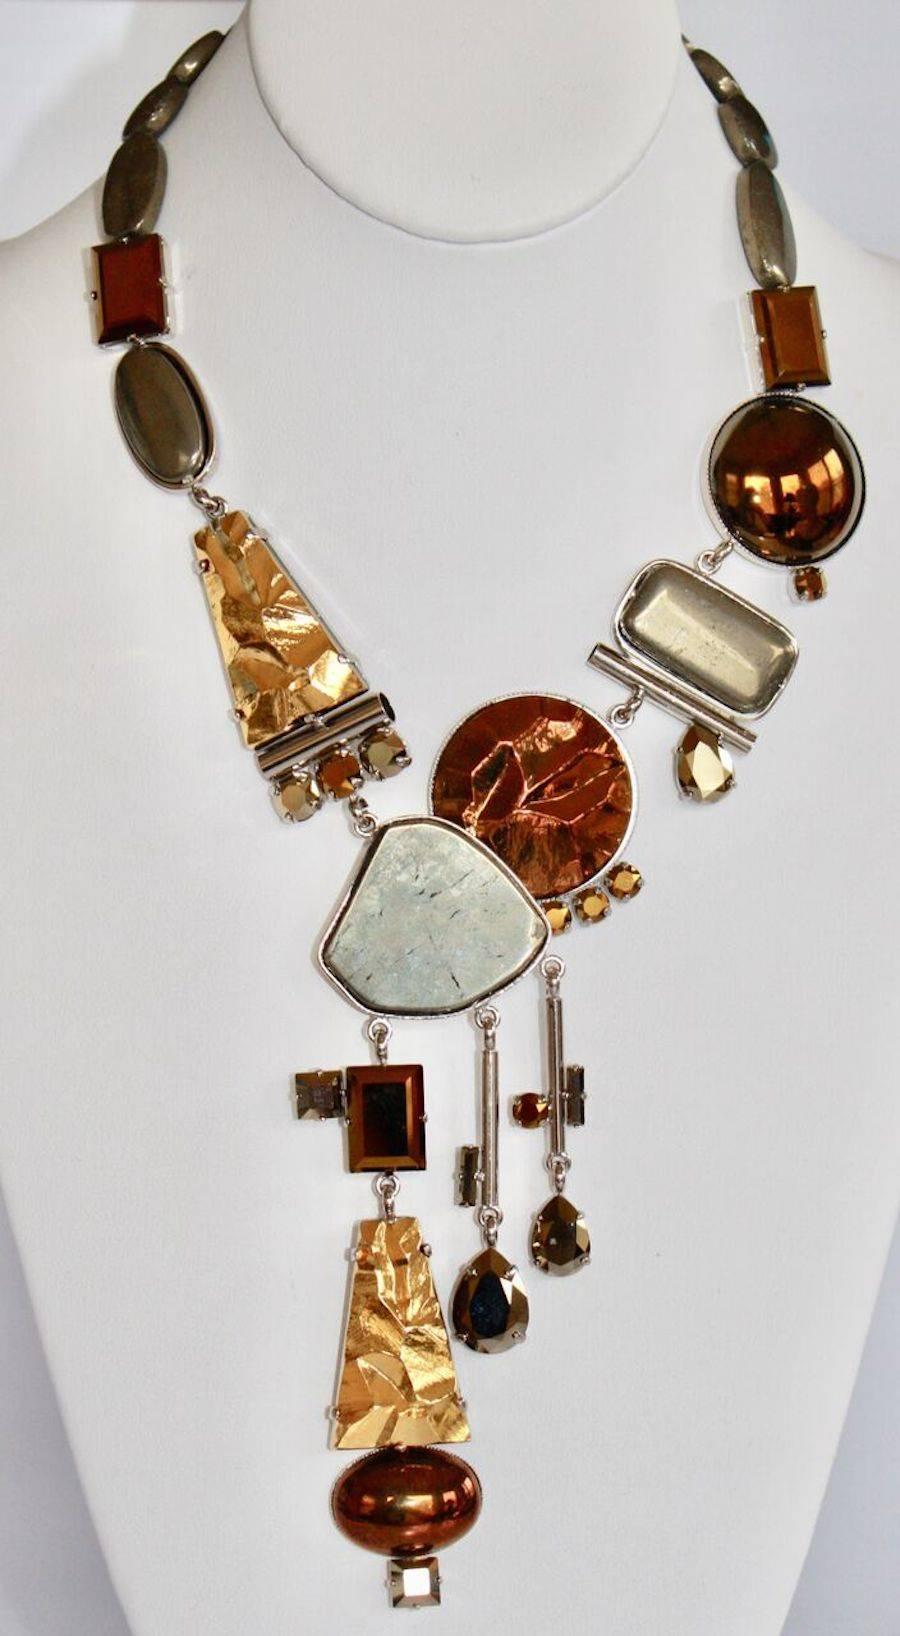 Pyrite, glass cabochon, and Swarovski crystal drop necklace from Philippe Ferrandis. 